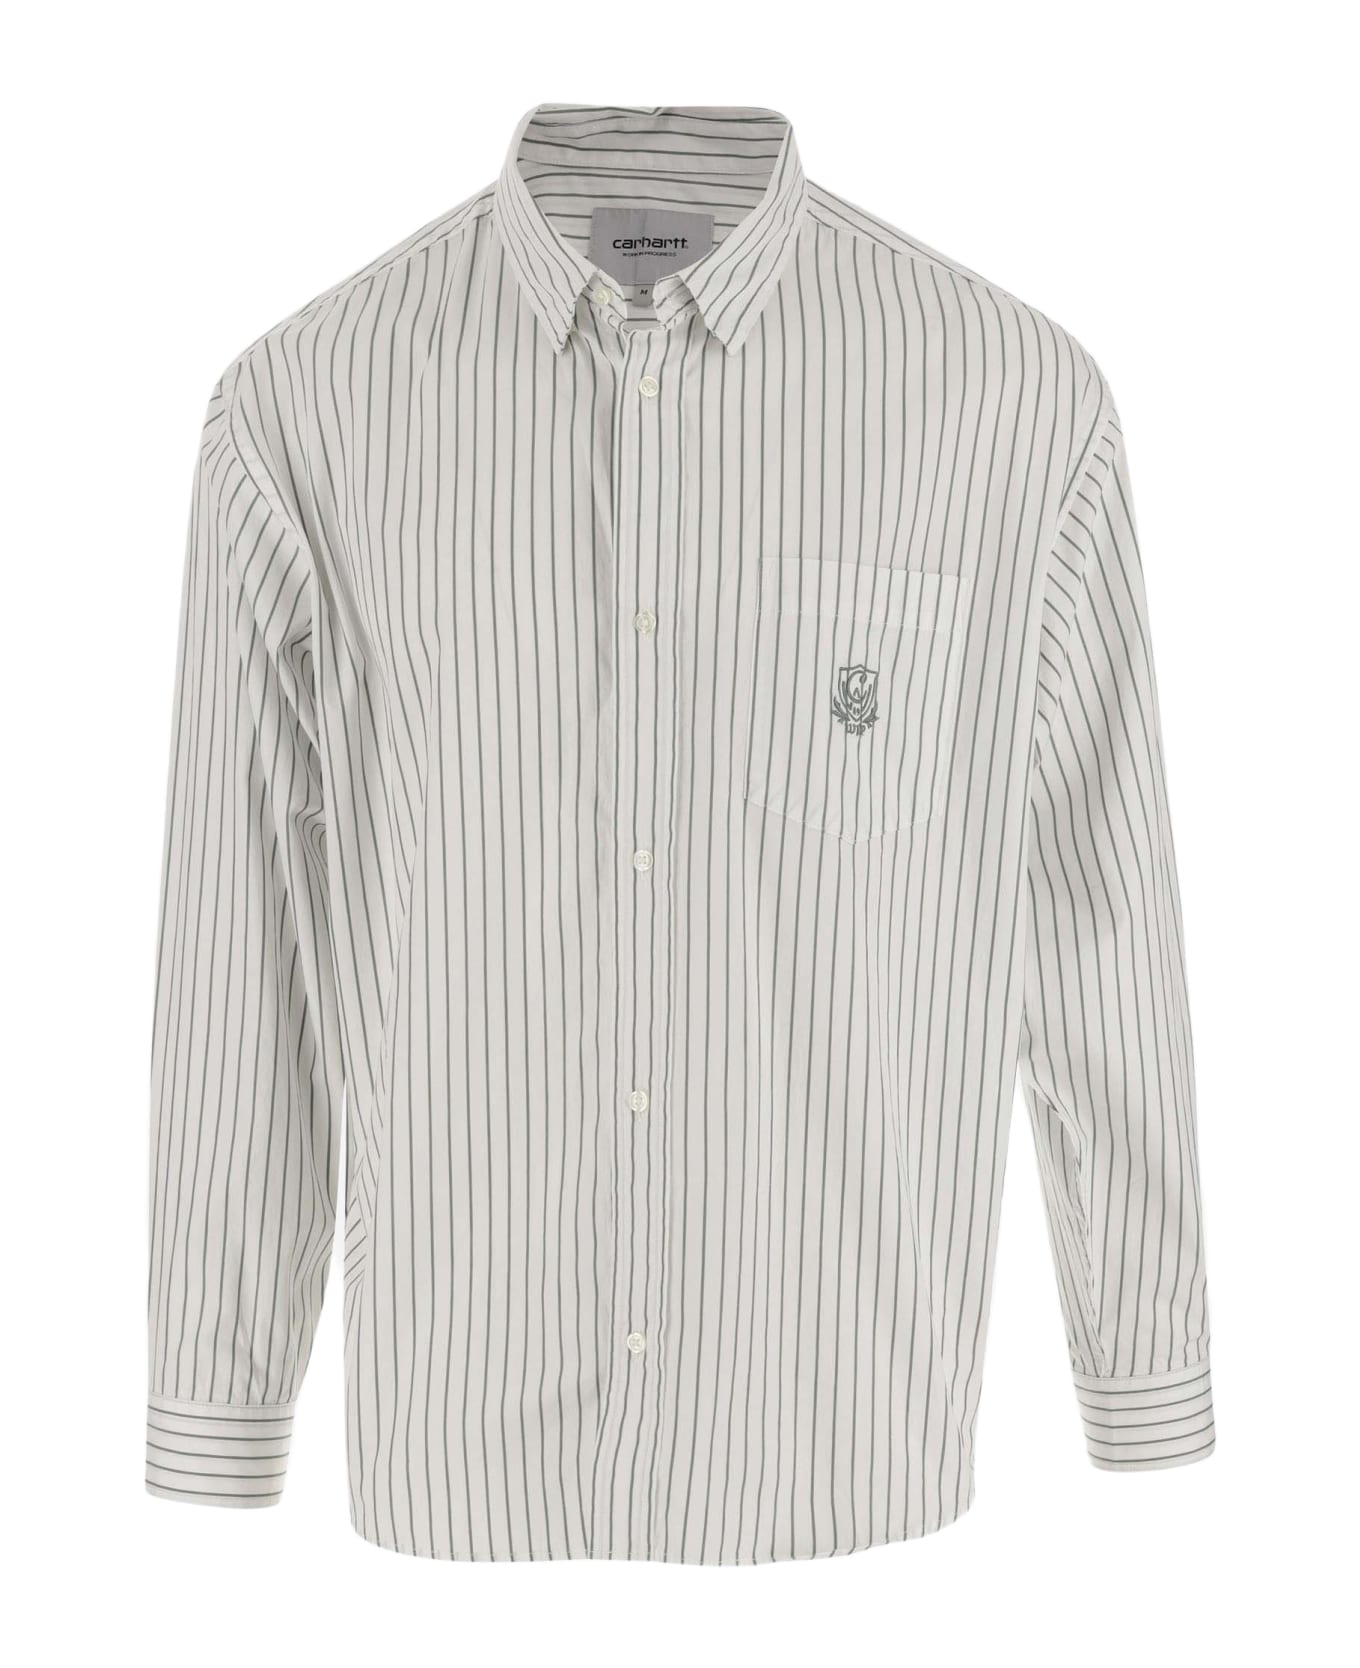 Carhartt Cotton Shirt With Striped Pattern - Red